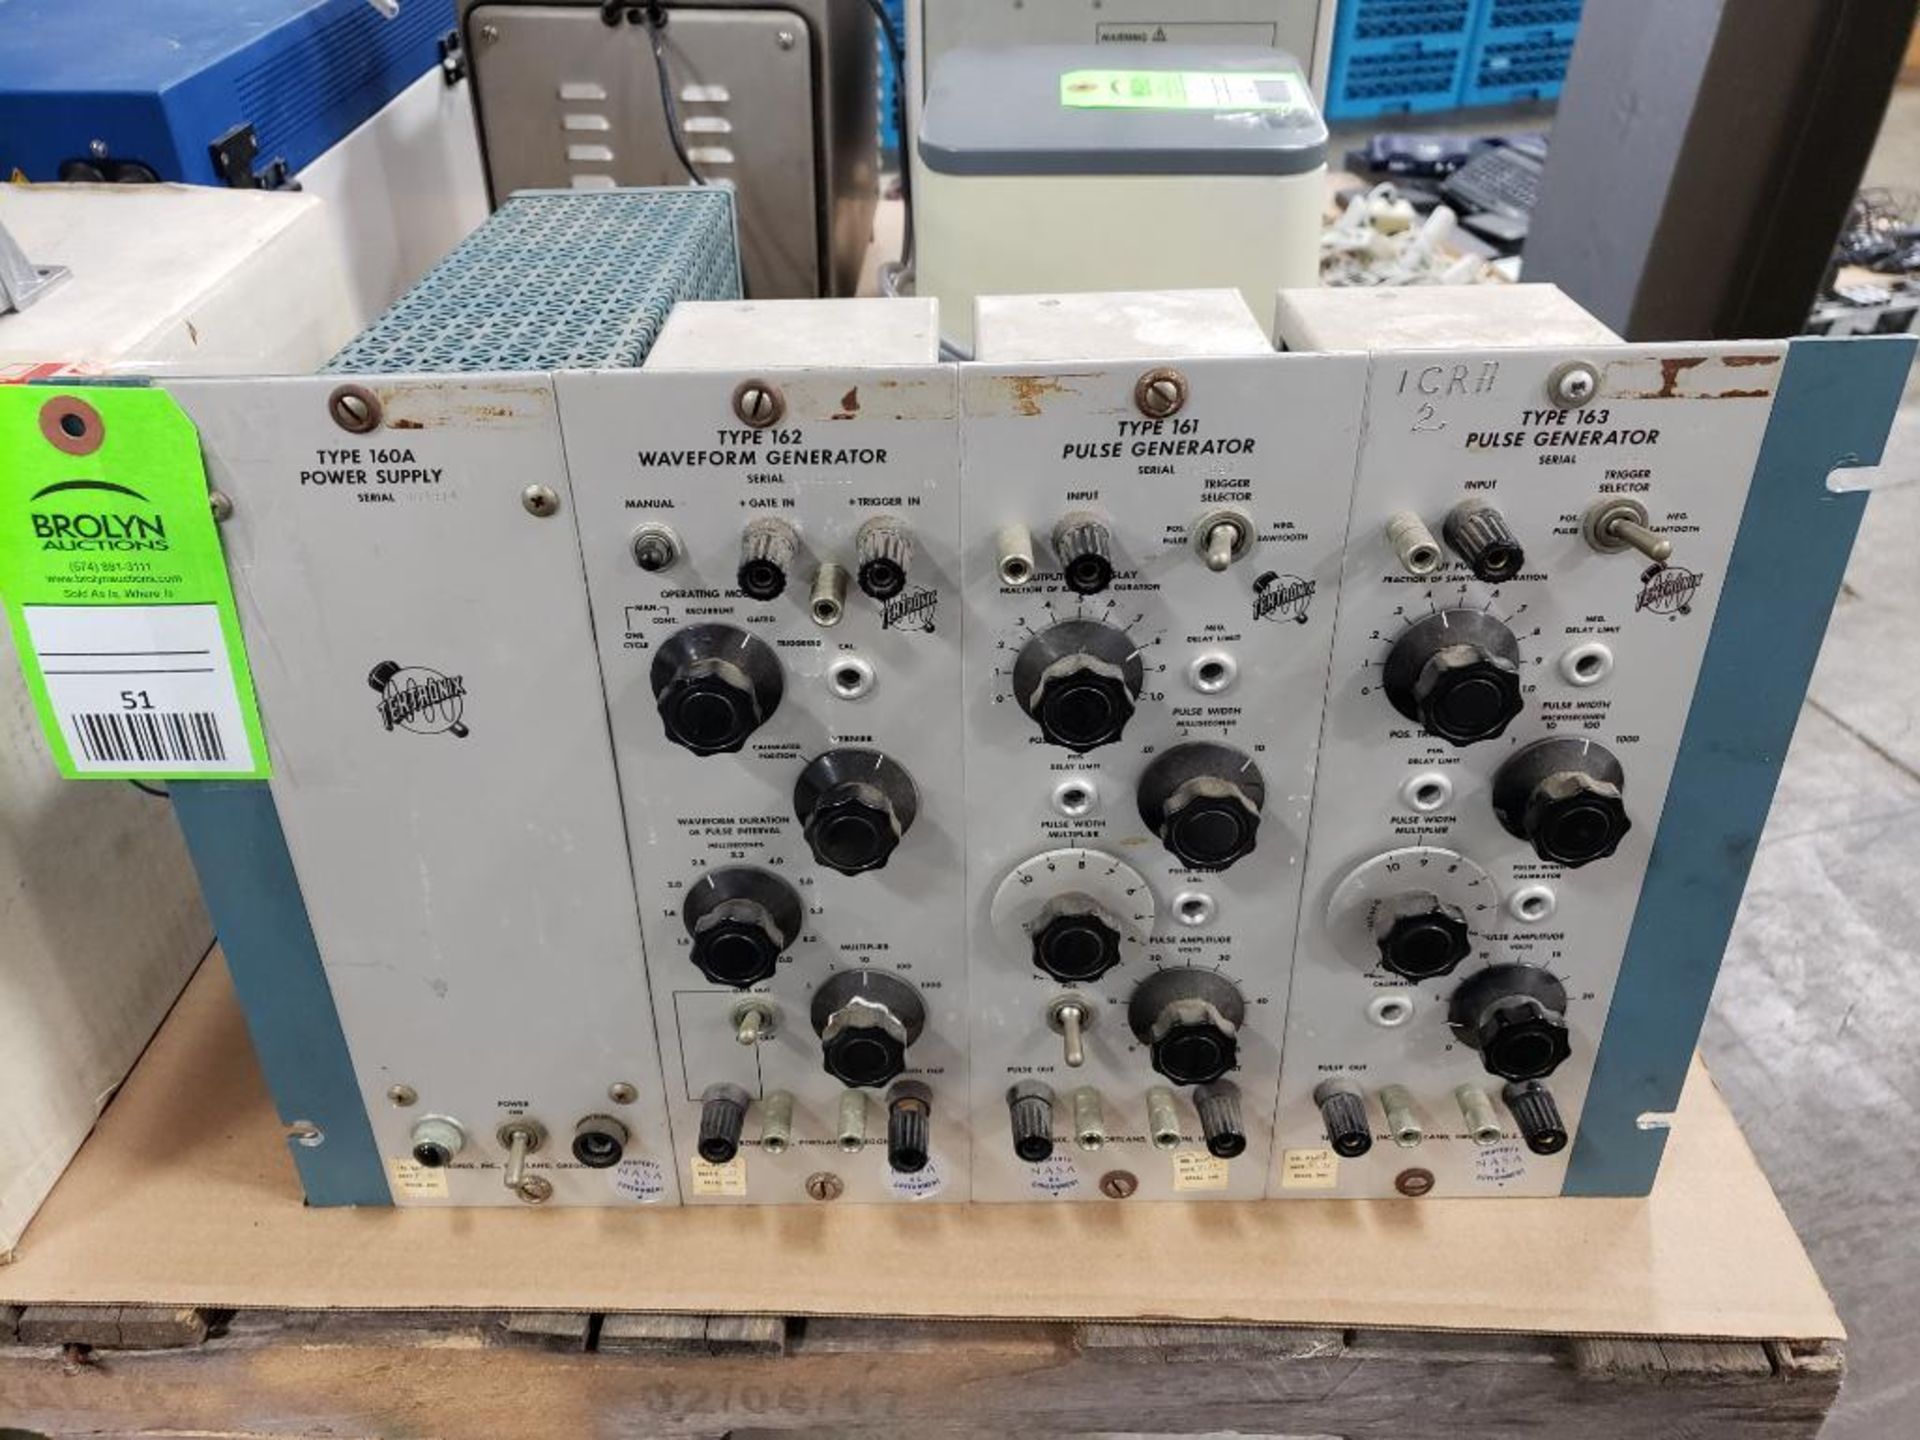 Tektronix rack with assorted components as pictured.